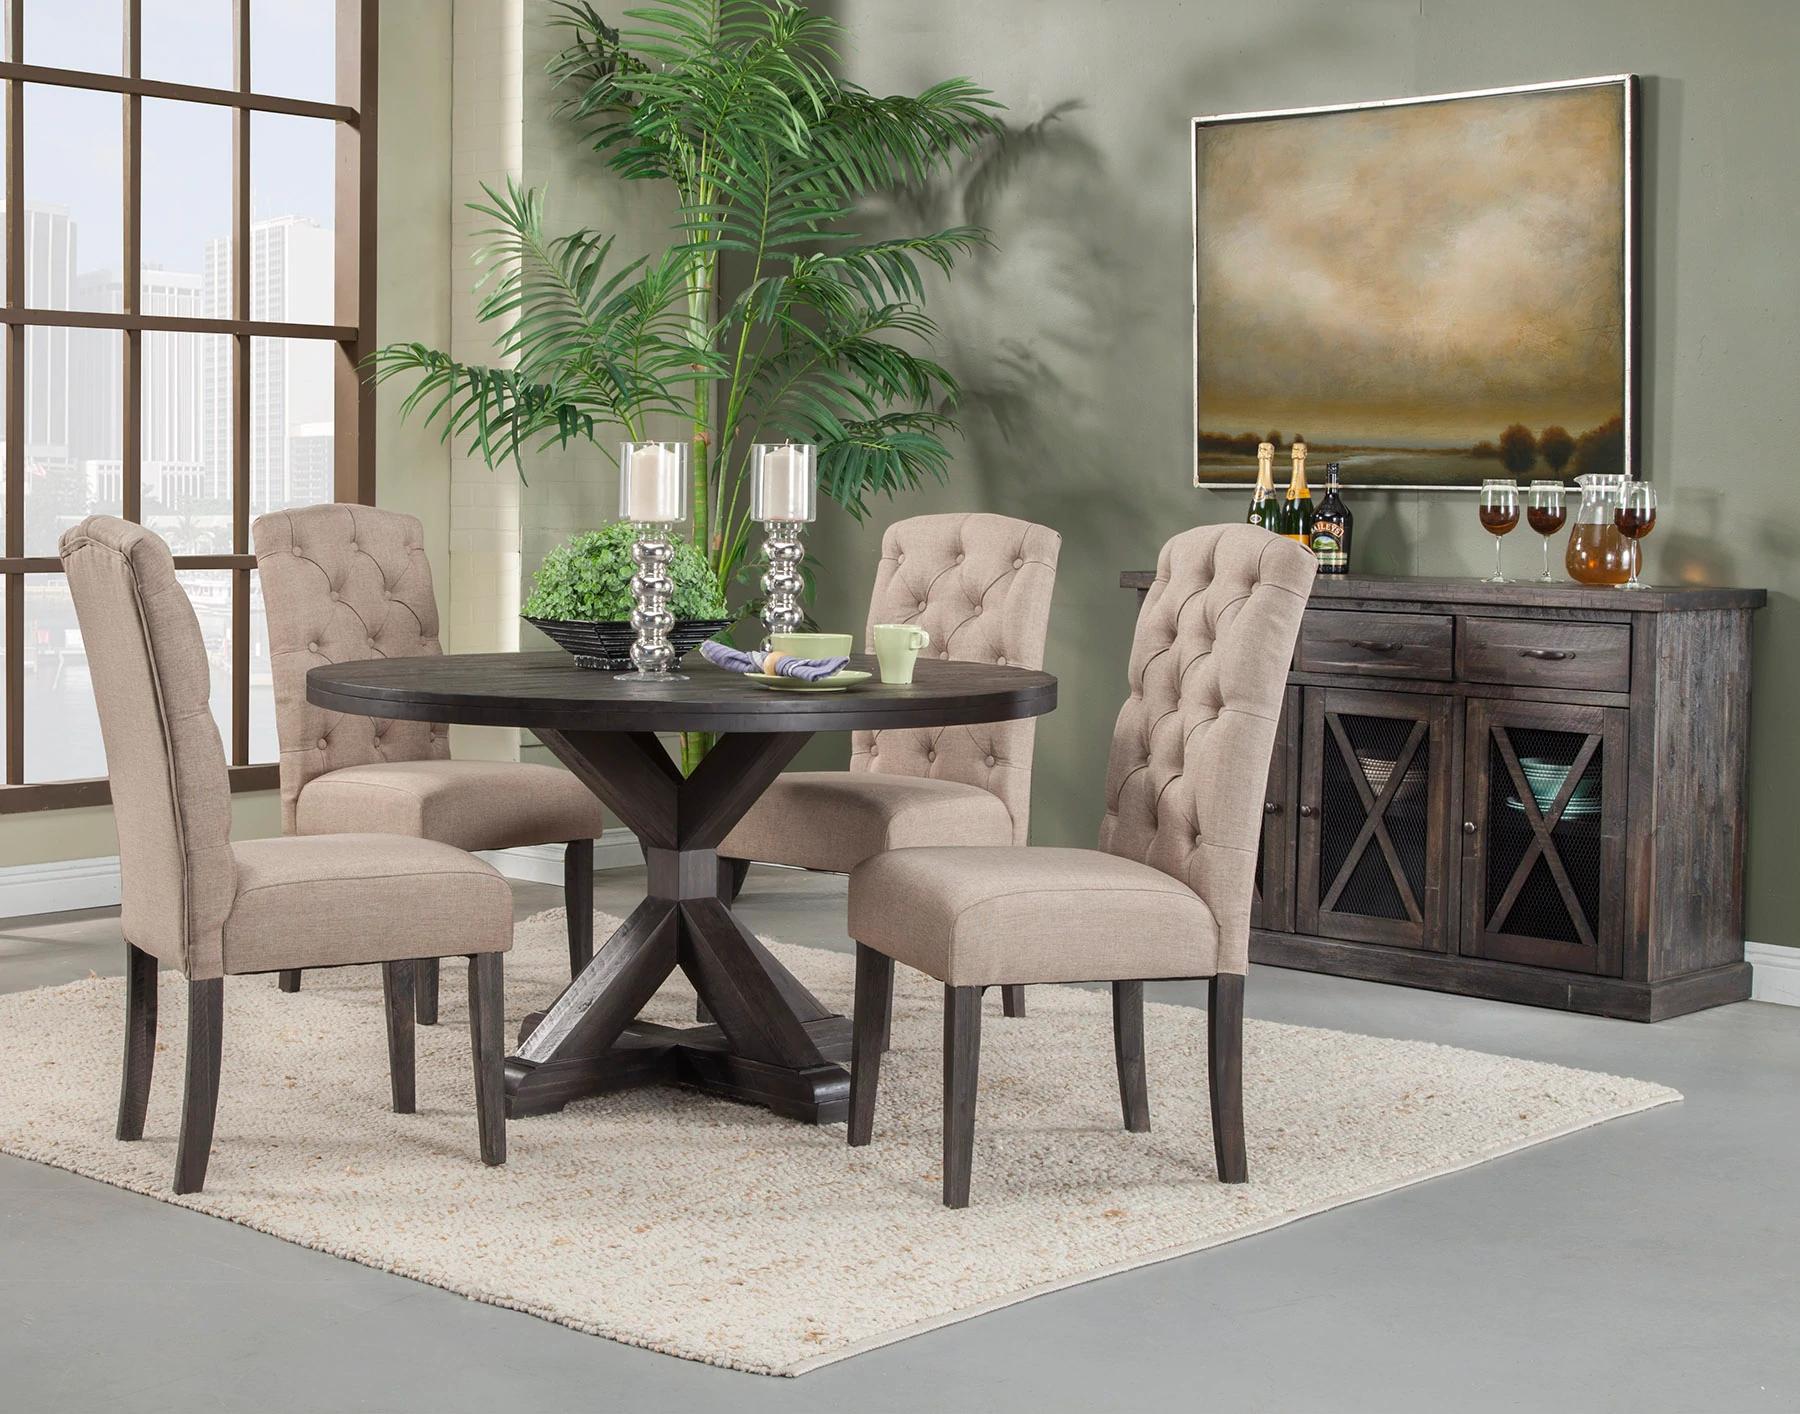 Traditional Dining Table Set NEWBERRY 1468-25-Set-6 in Cream, Gray Fabric